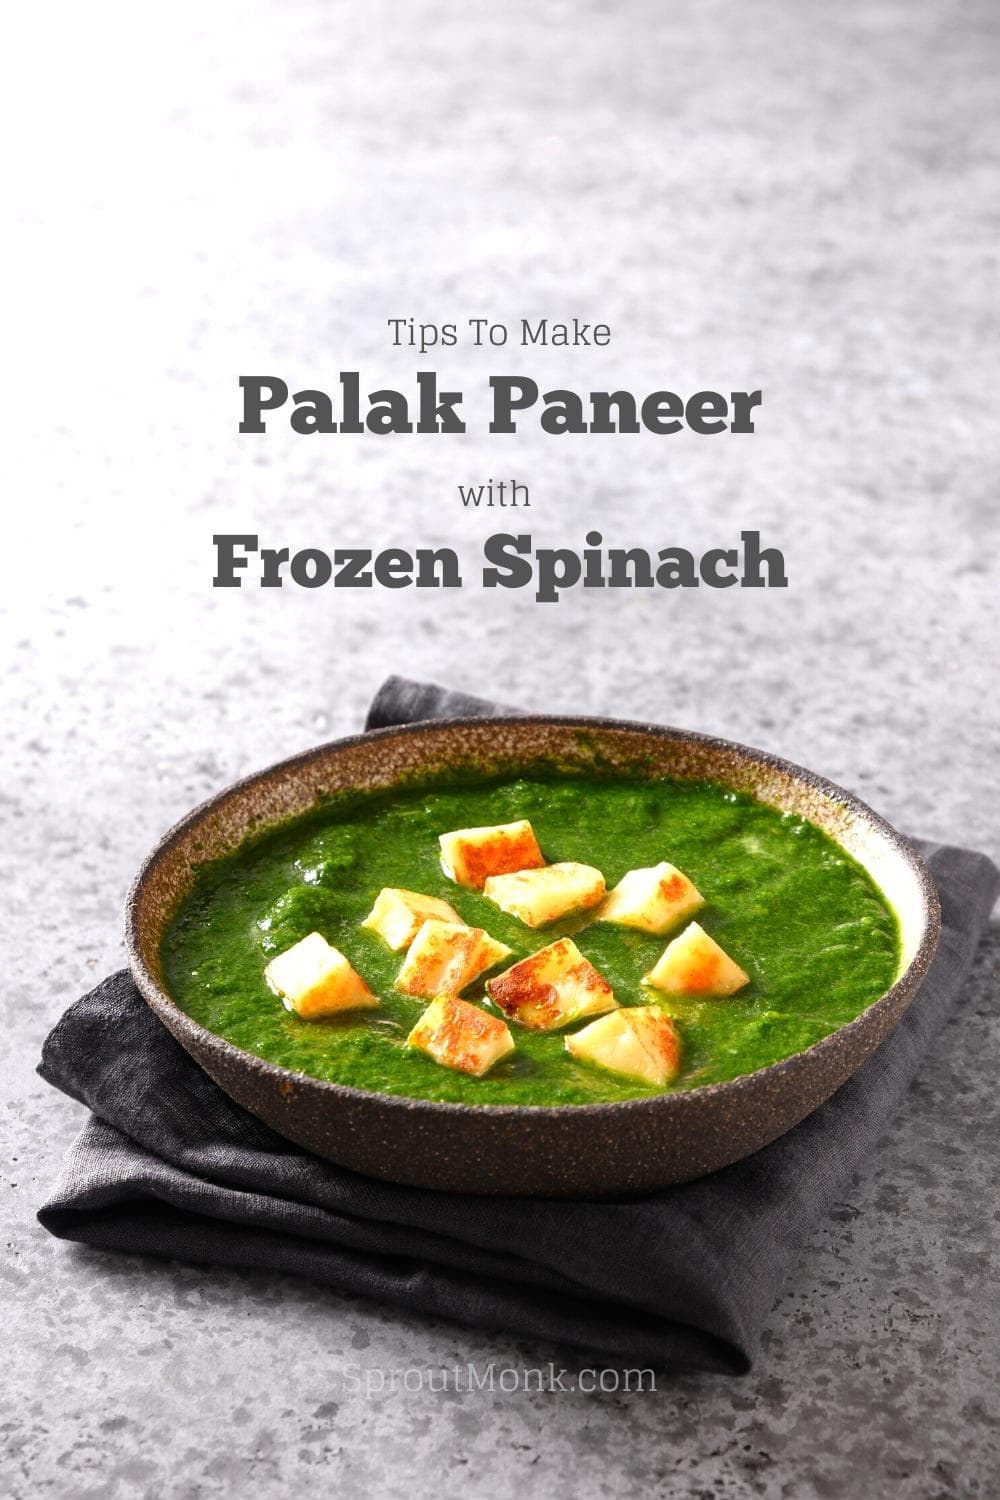 palak paneer with frozen spinach cover image